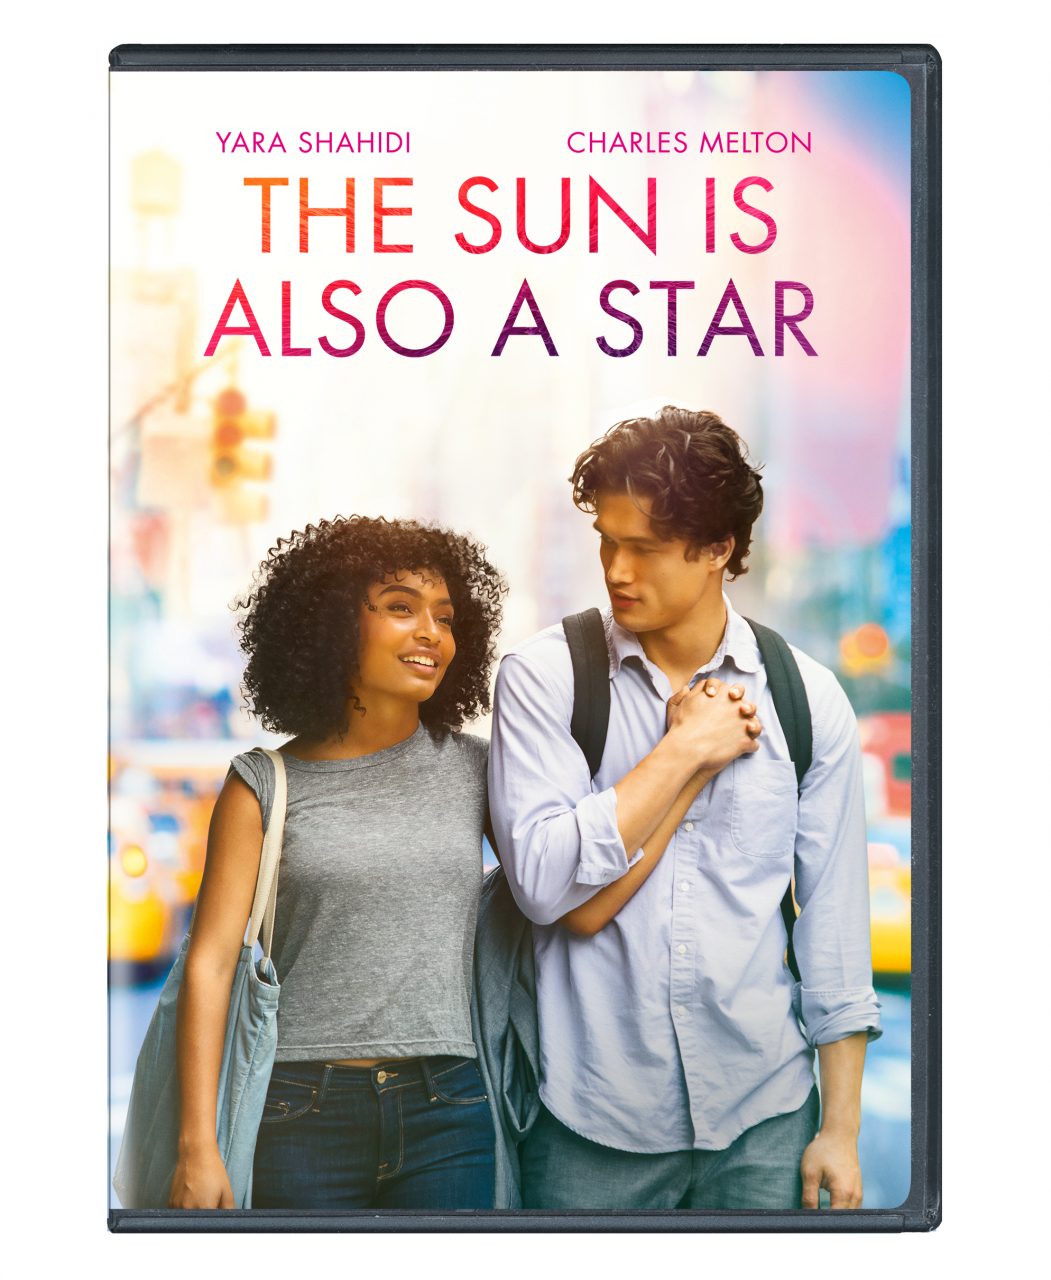 The Sun Is Also A Star DVD cover (Warner Bros. Home Entertainment)